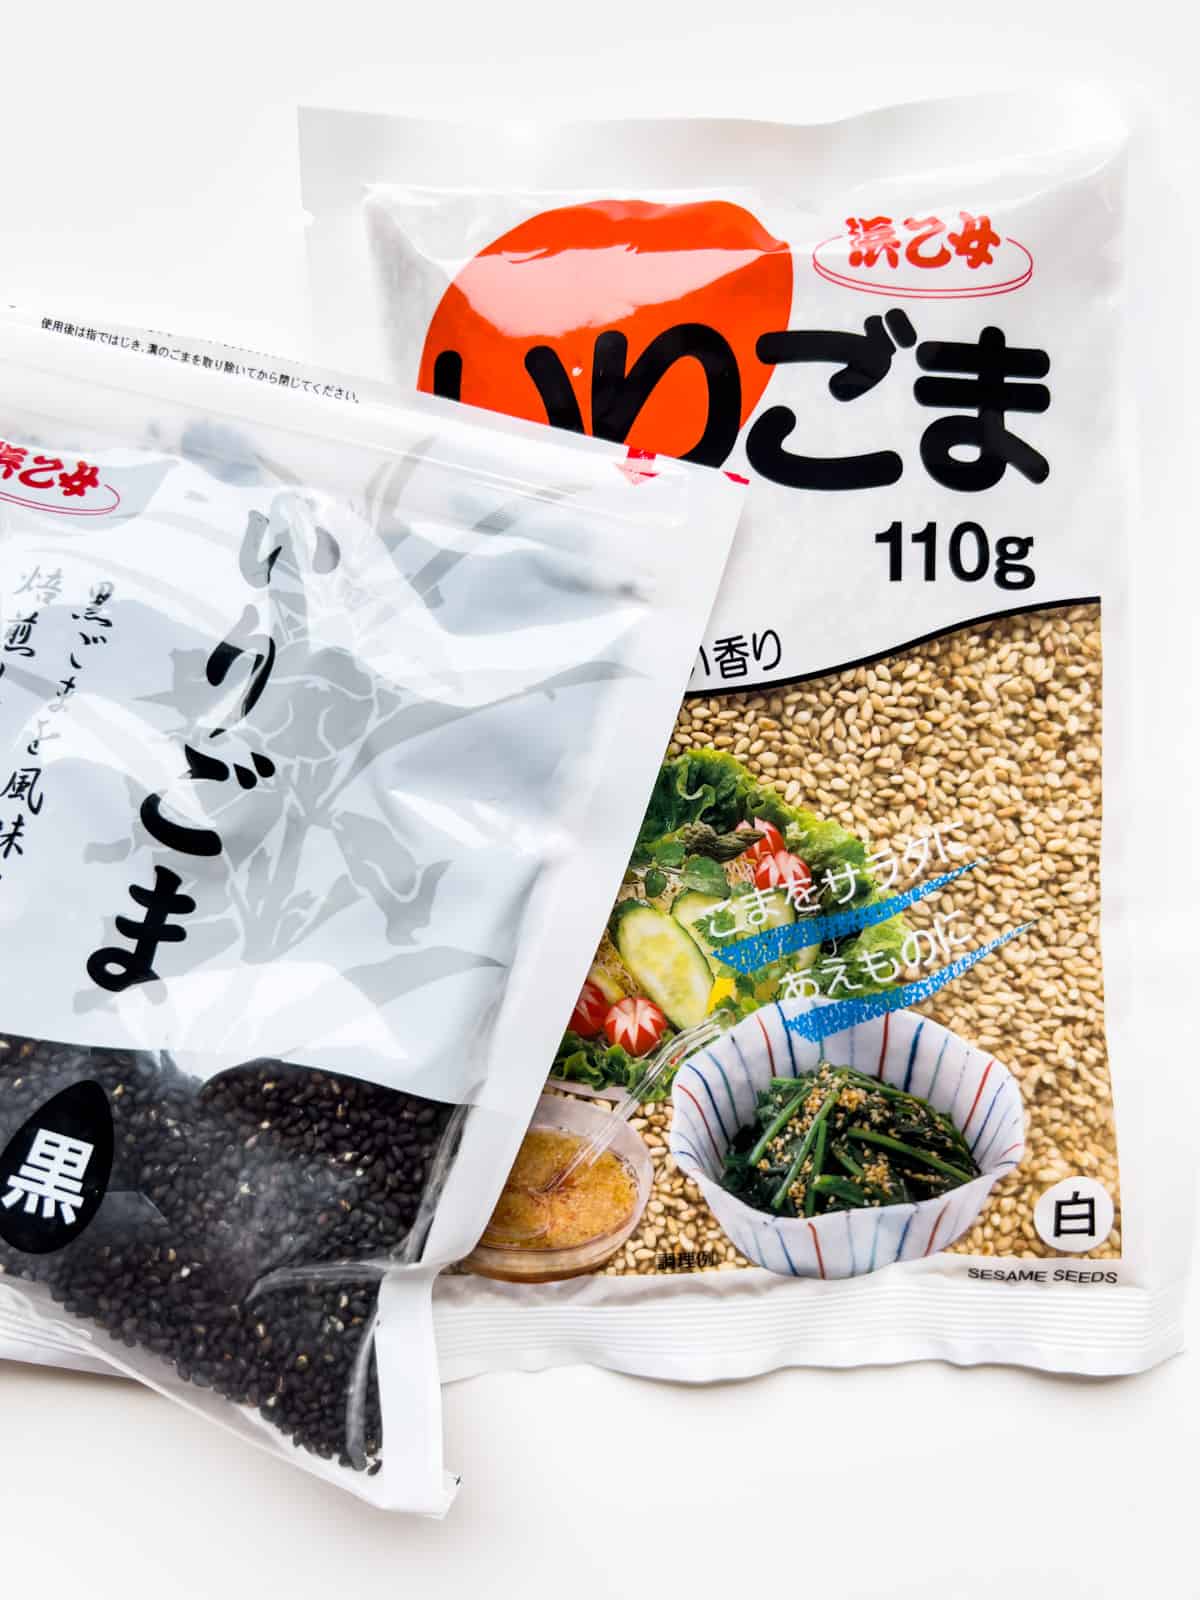 An image of two packages of sesame seeds, one containing white sesame seeds, the other black sesame seeds